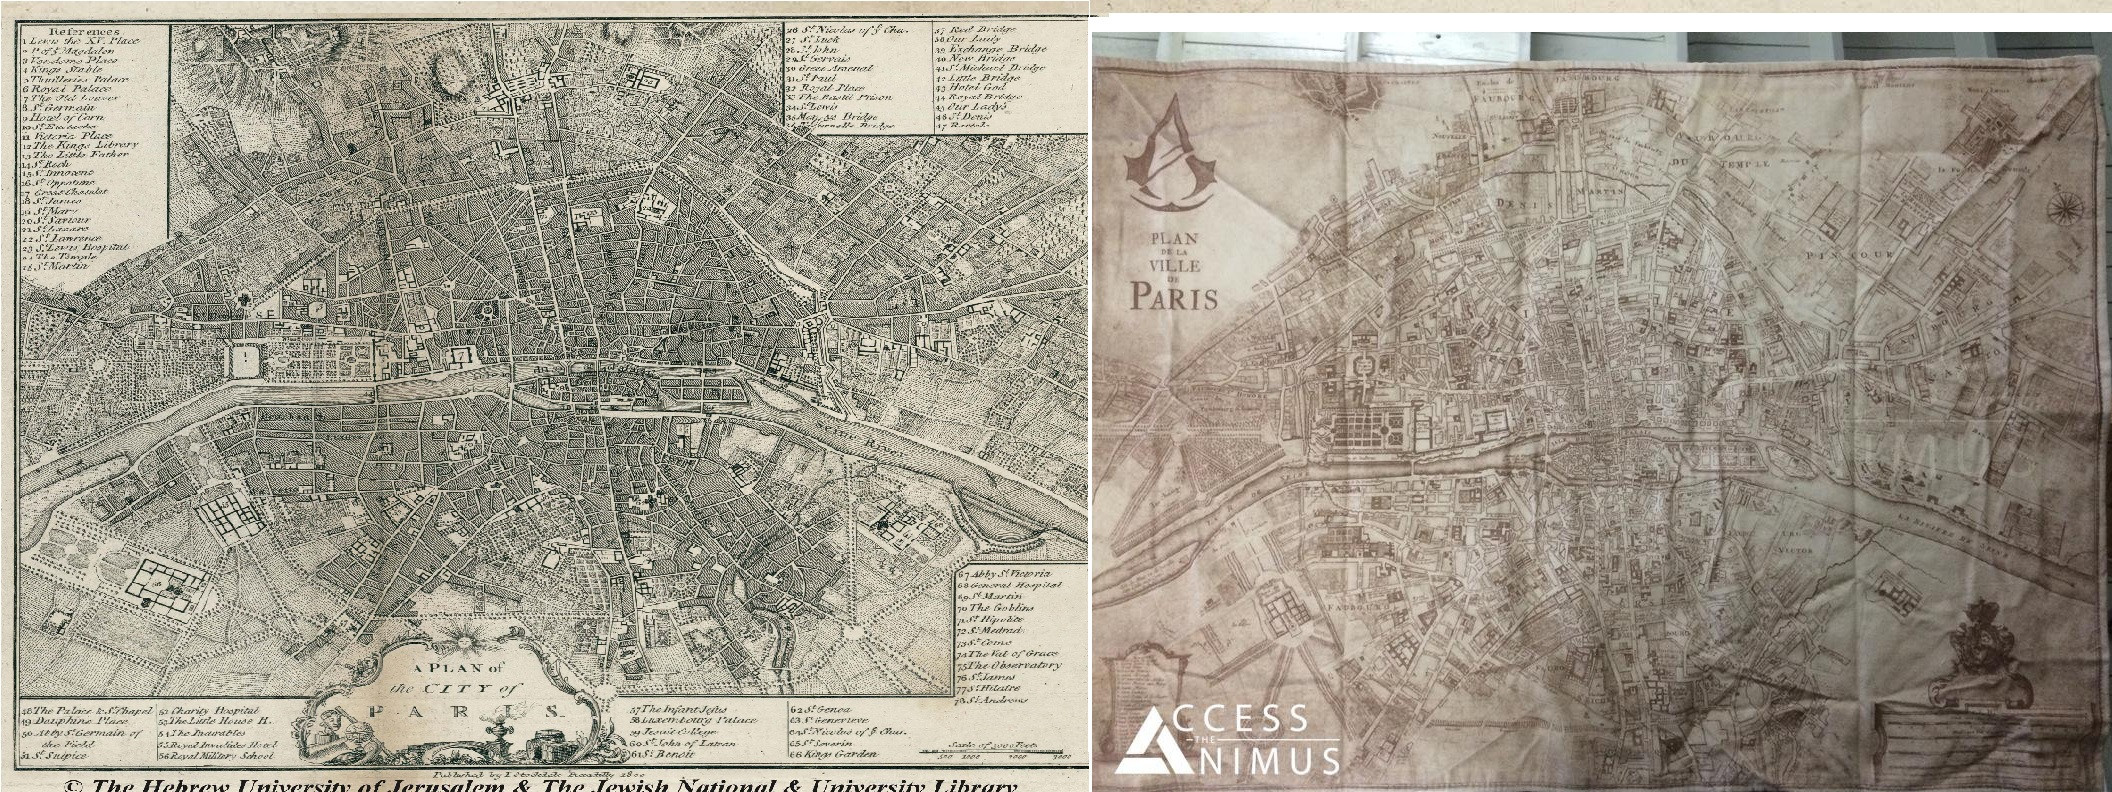 assassin-s-creed-unity-map-is-similar-in-size-to-the-actual-map-of-18th-century-paris-load-the